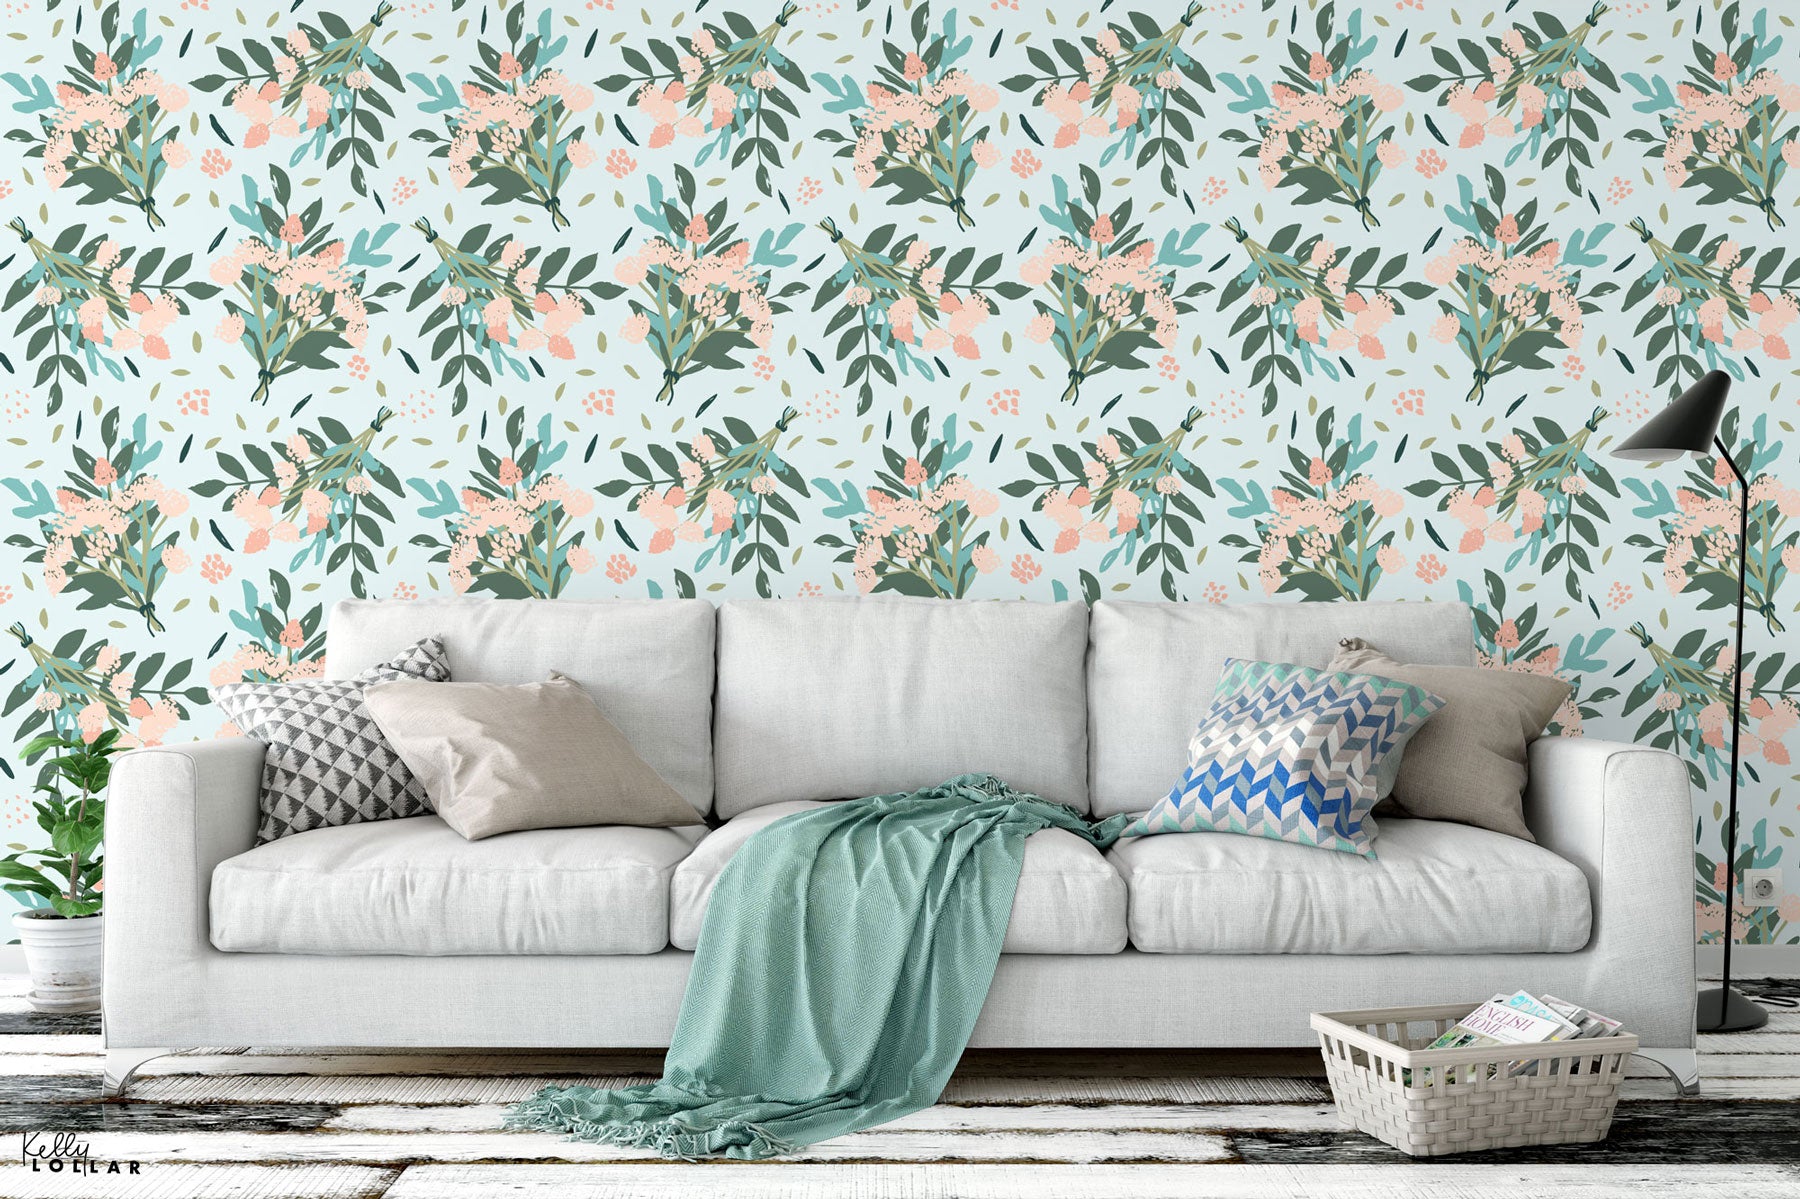 Sample Wallpaper Using the Backyard Bouquet Surface Pattern in Spring by Kelly Lollar 